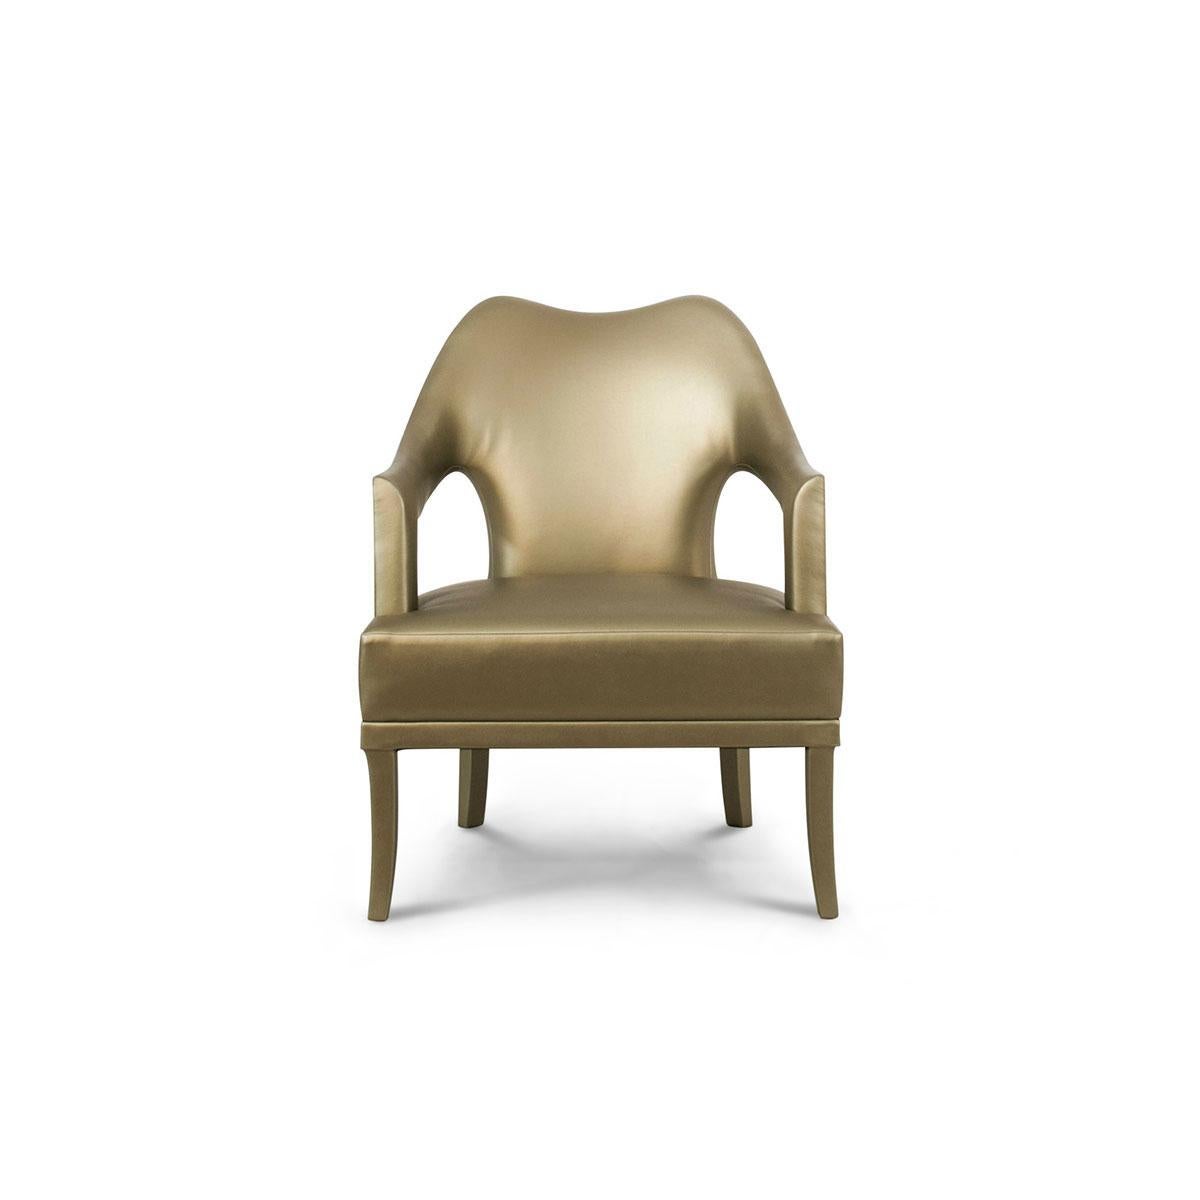 Portuguese Nº20 Armchair With Golden Polished Nails For Sale